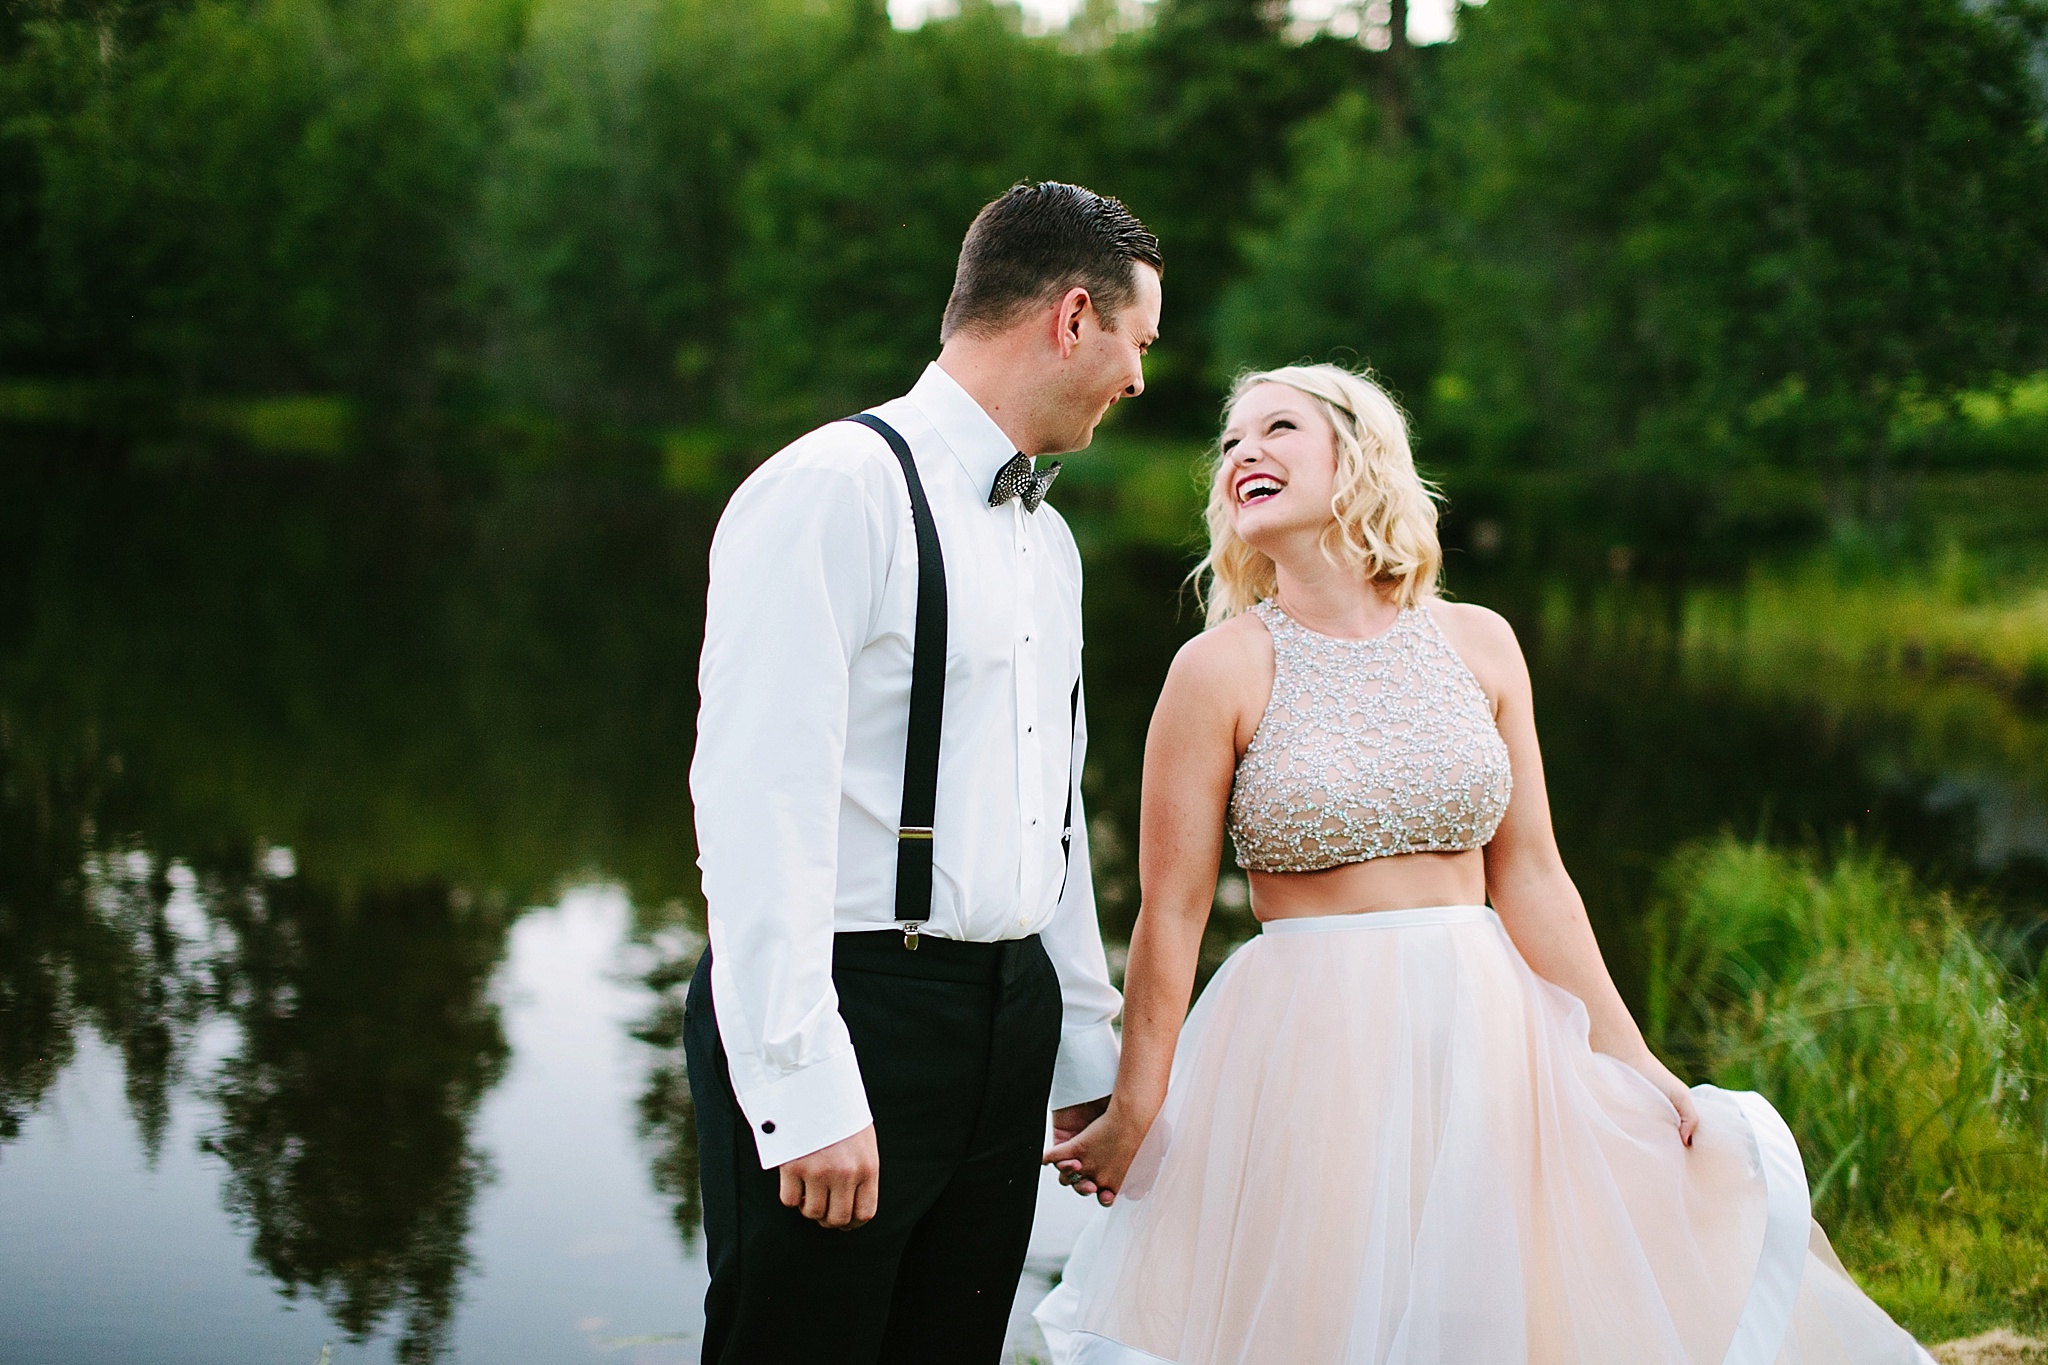 Missoula MT Backyard Wedding Photos Bride and Groom Holding Hands Laughing in Second Dancing Dress